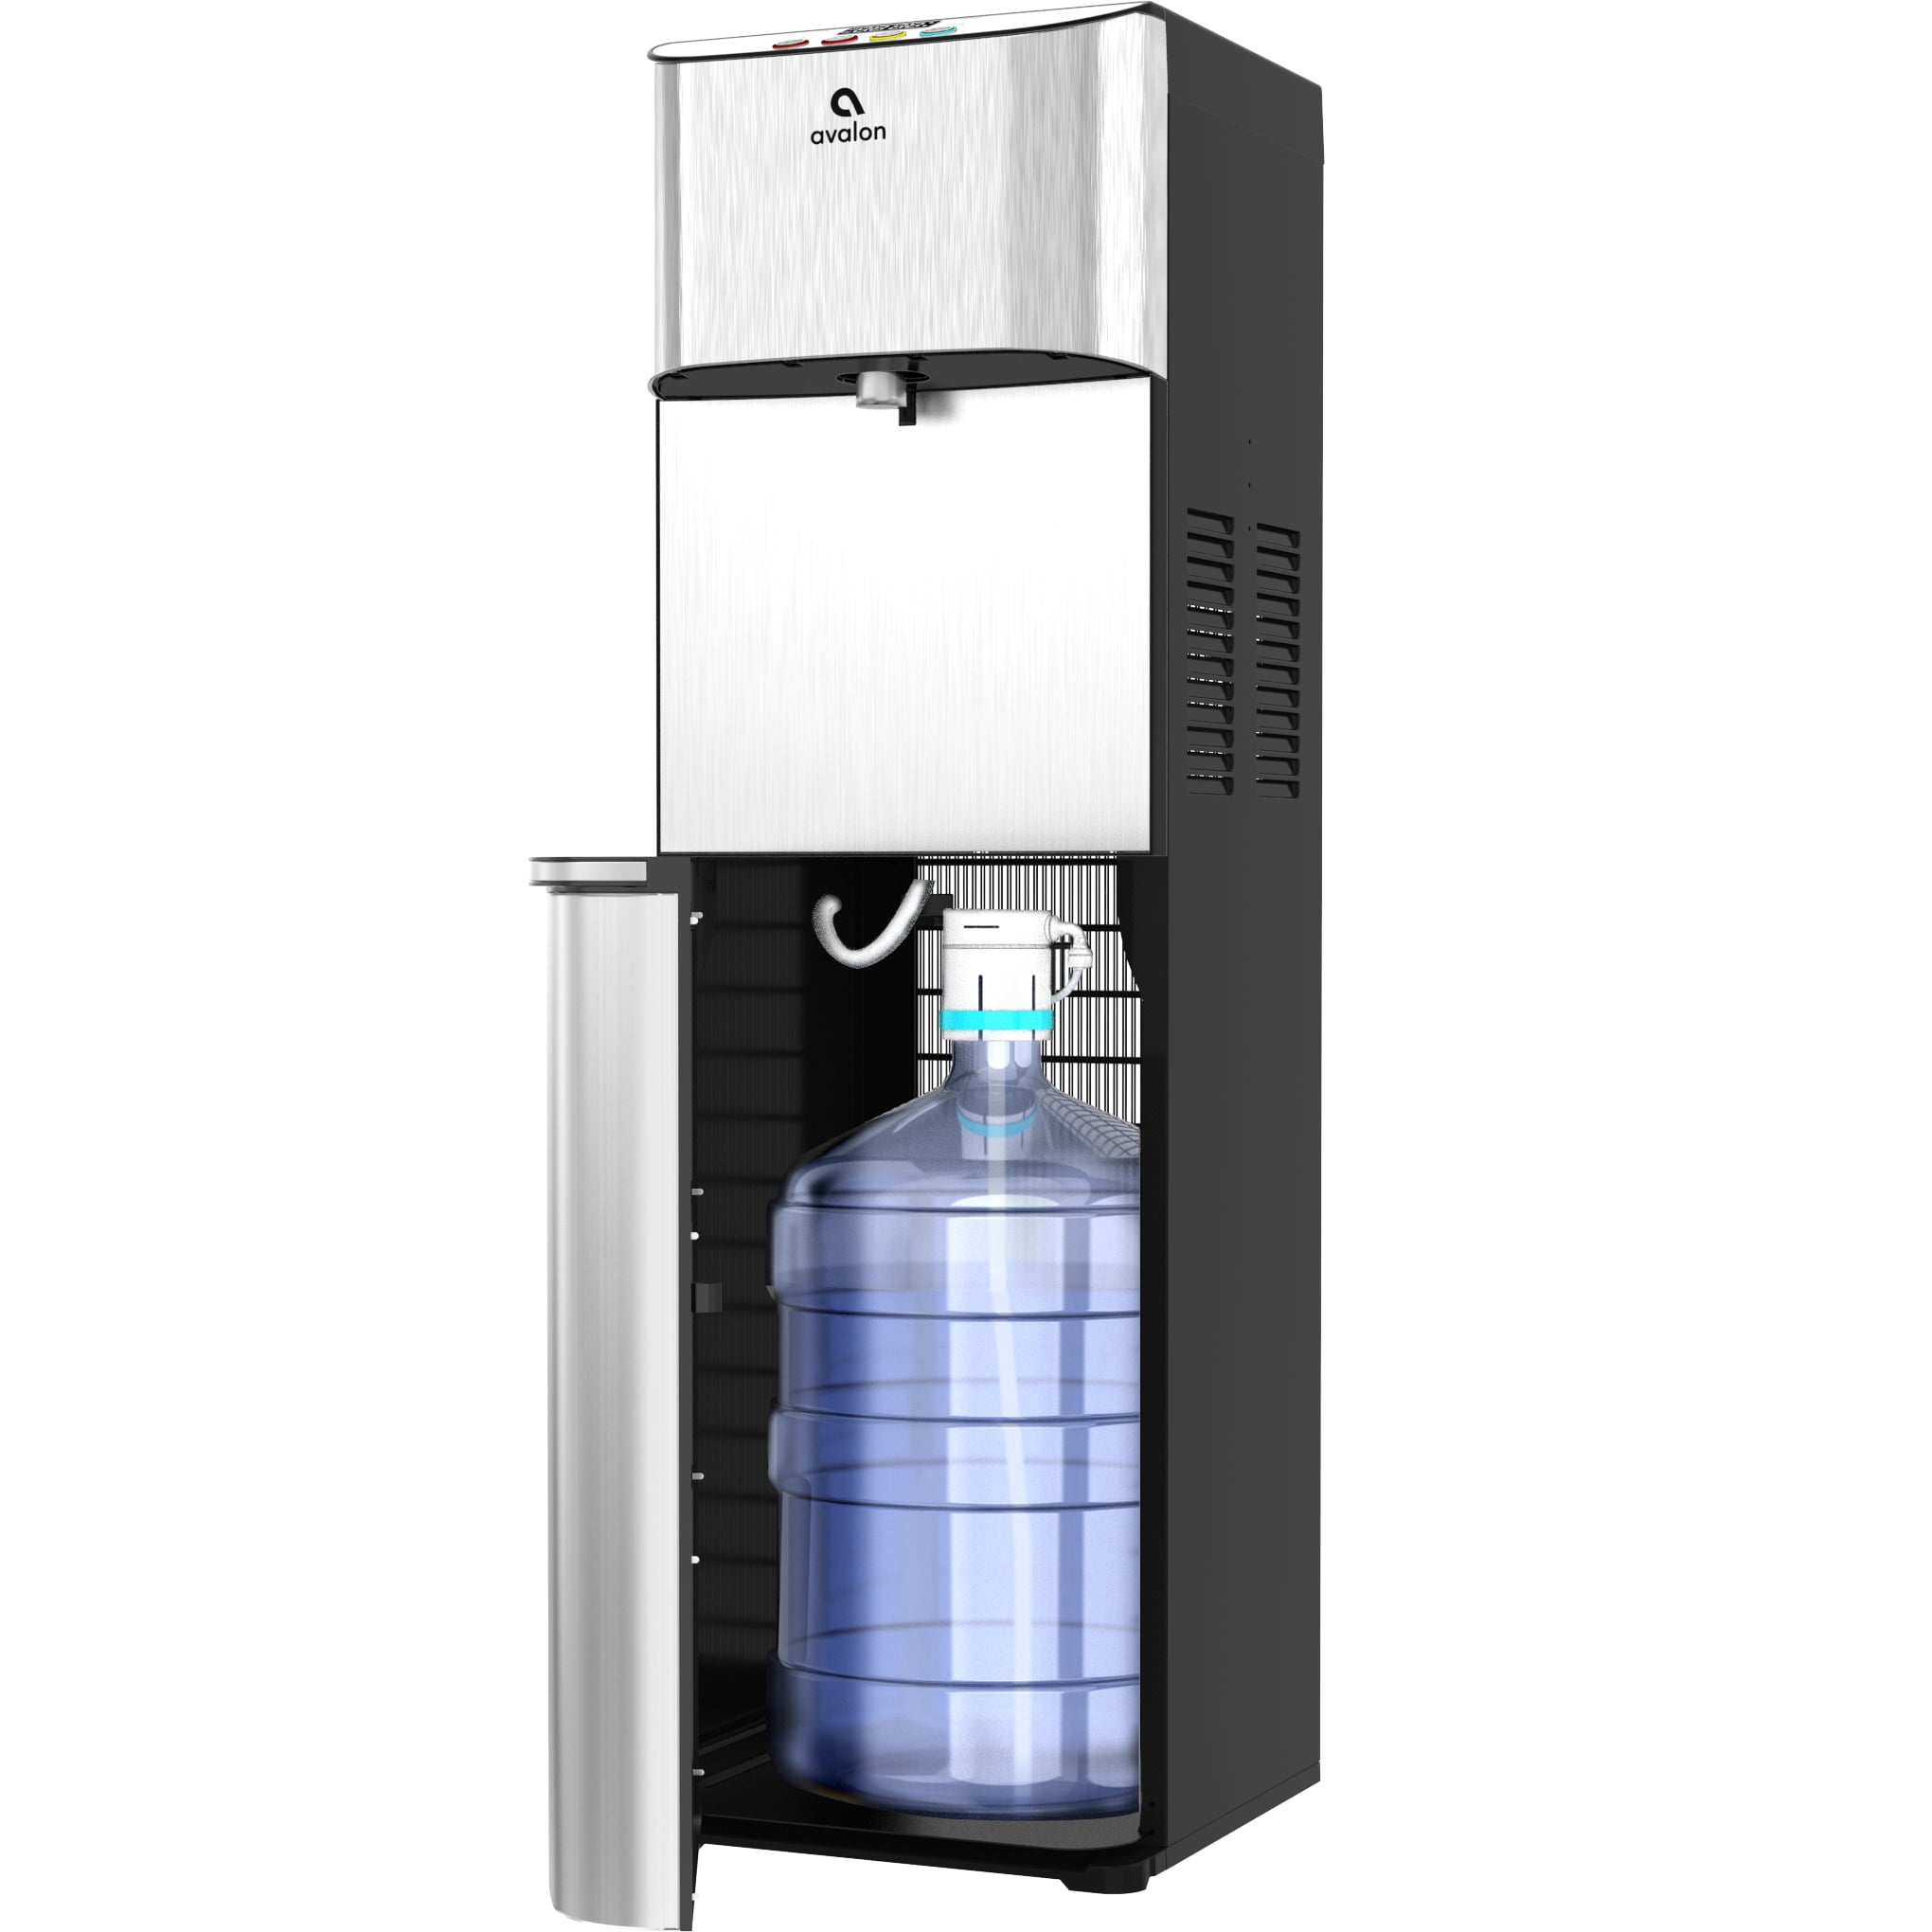 Avalon A1 Water Cooler with hot and cold temperatures and child safety –  Avalon US